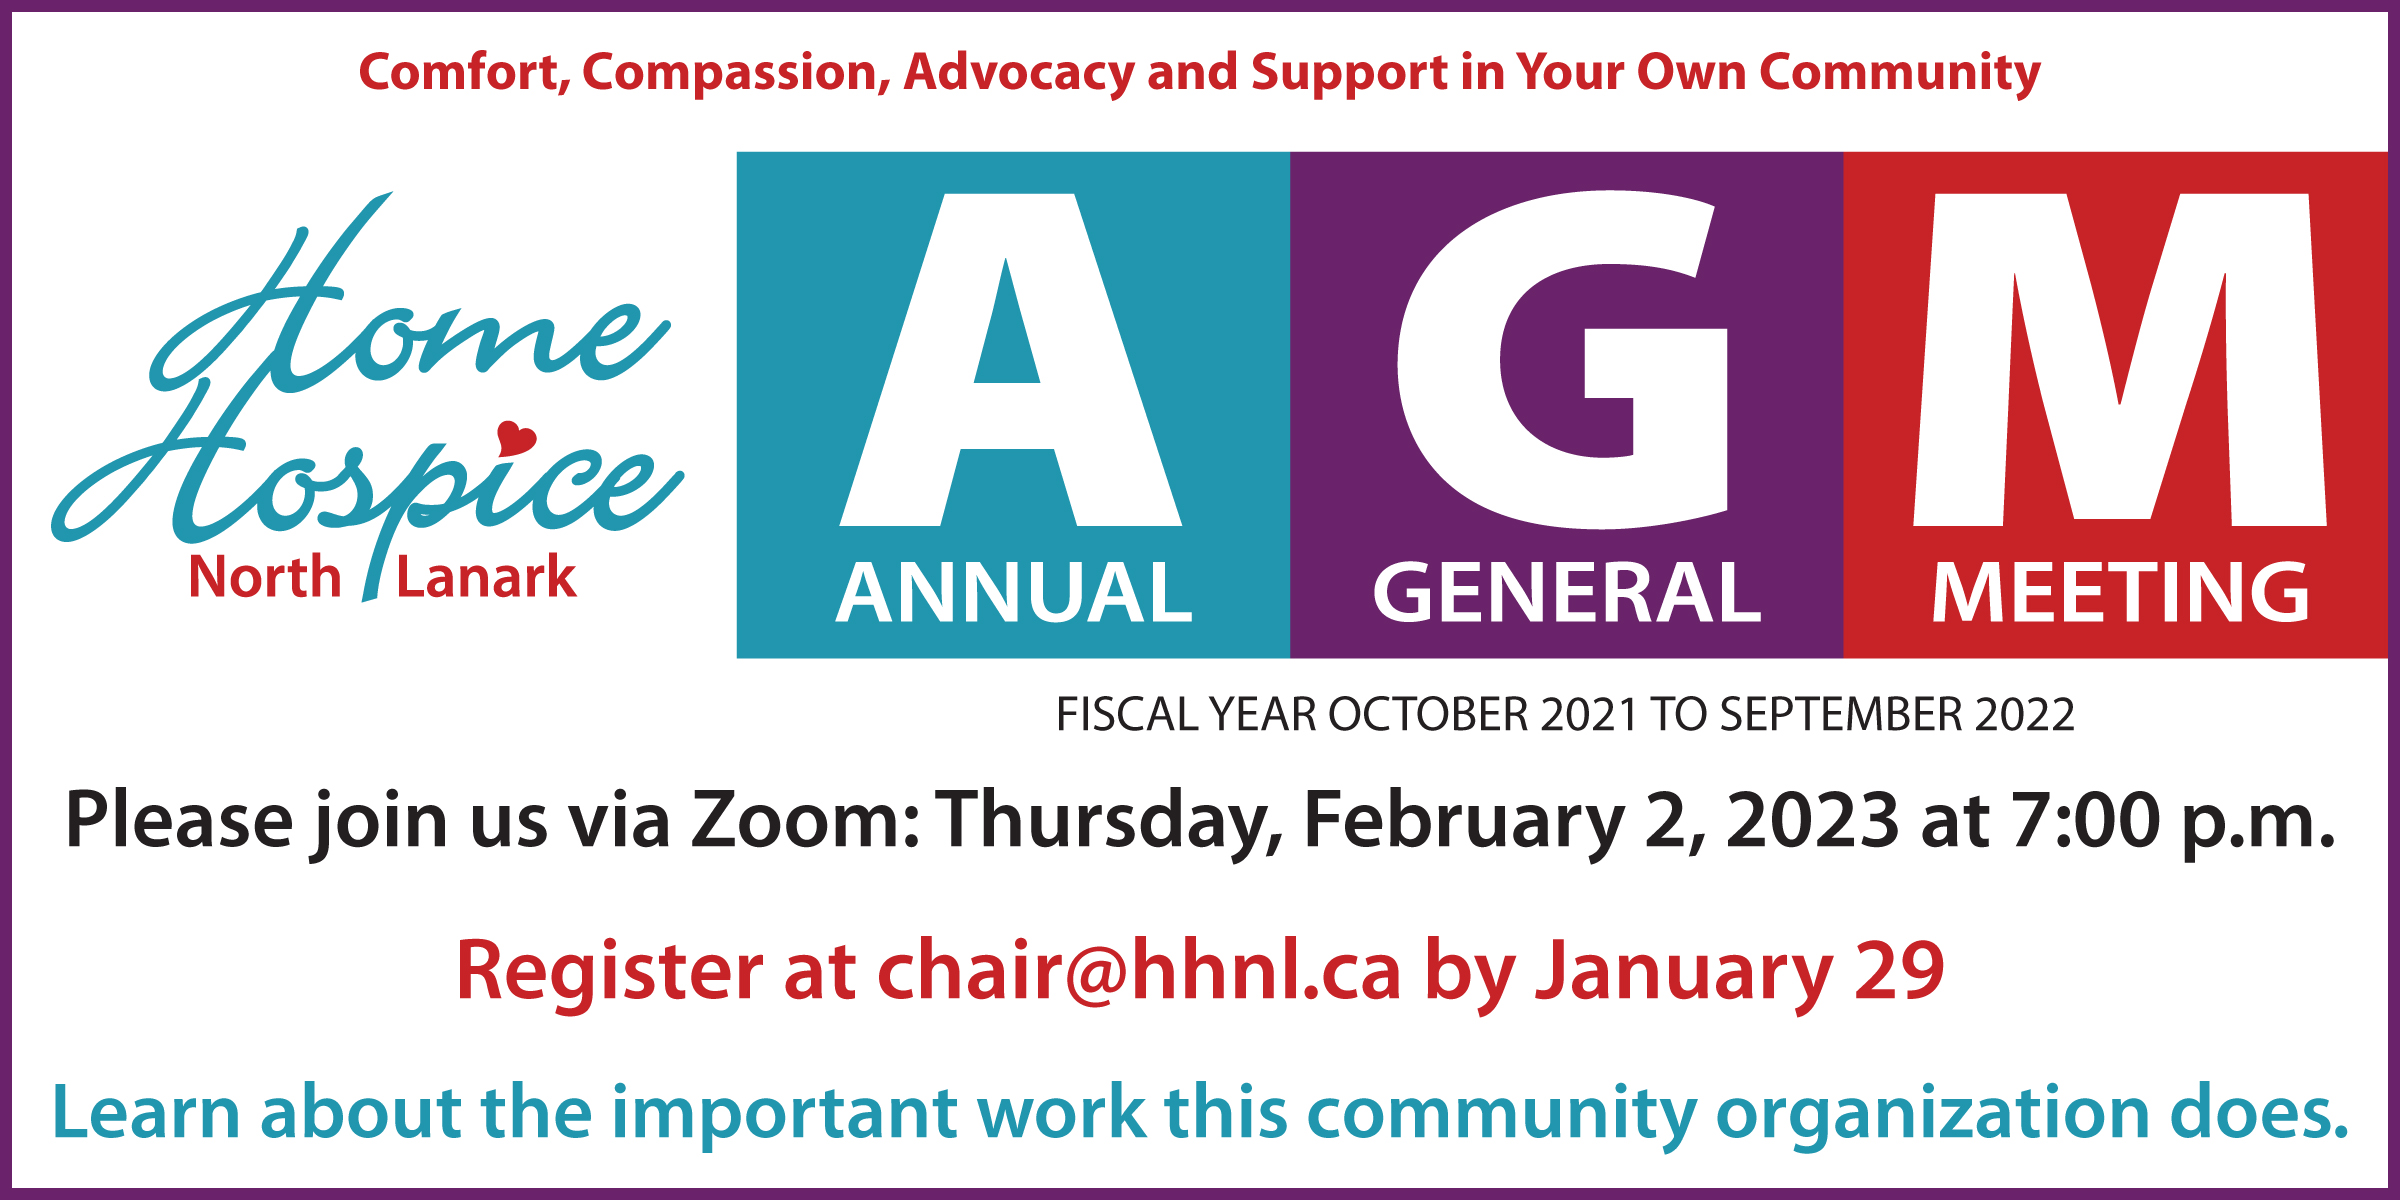 Home Hospice North Lanark announcement about the Annual General Meeting on February 2, 2023. 